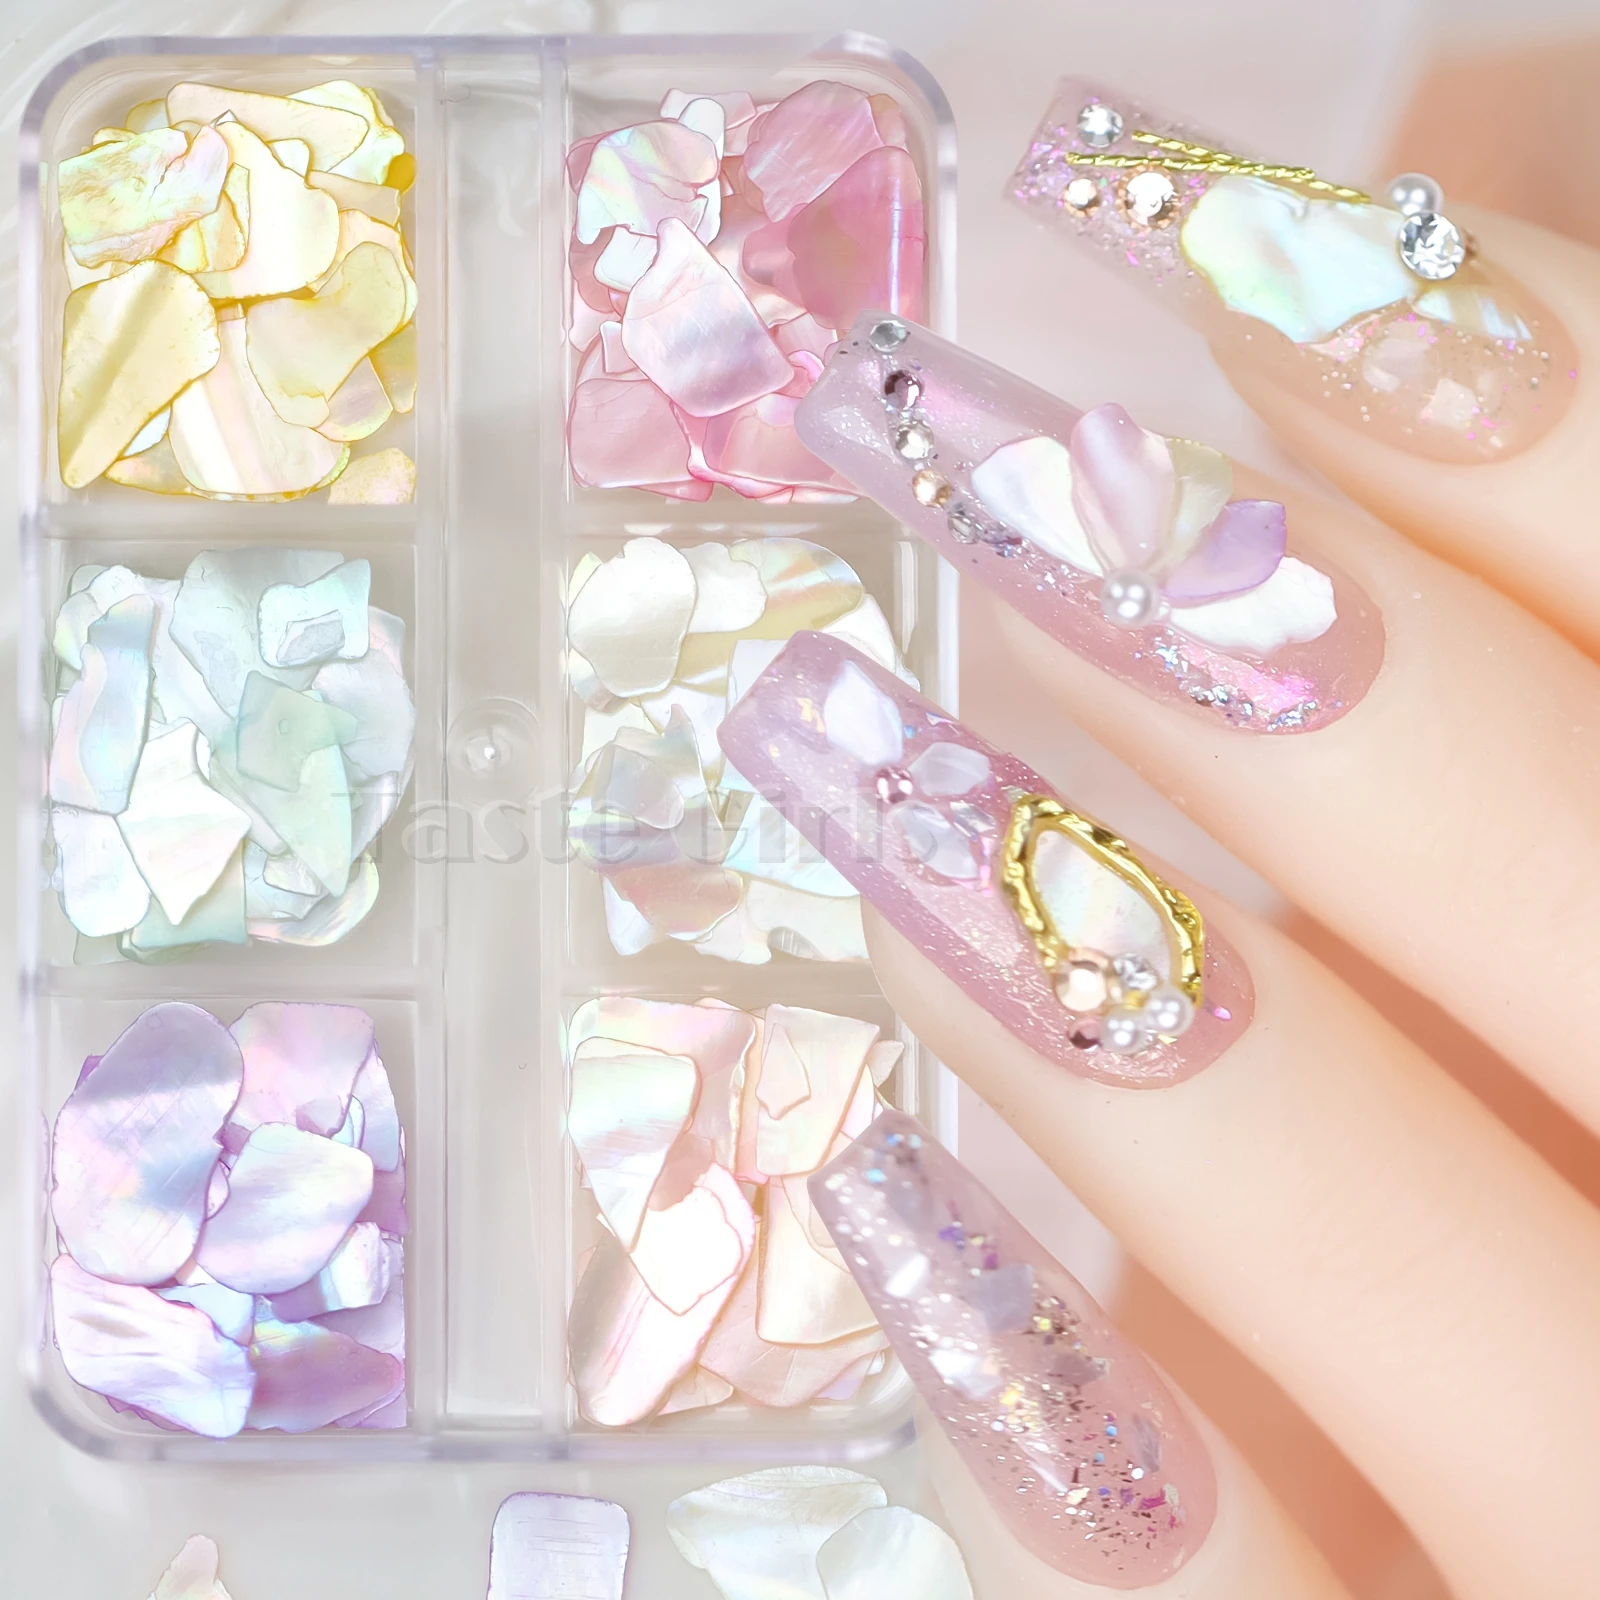 

6 Grids Aurora Colorful Natural Abalone Slice Sea Shell Irregular Fragments Nail Art Paillette Decals Manicure DIY Ornaments Tip